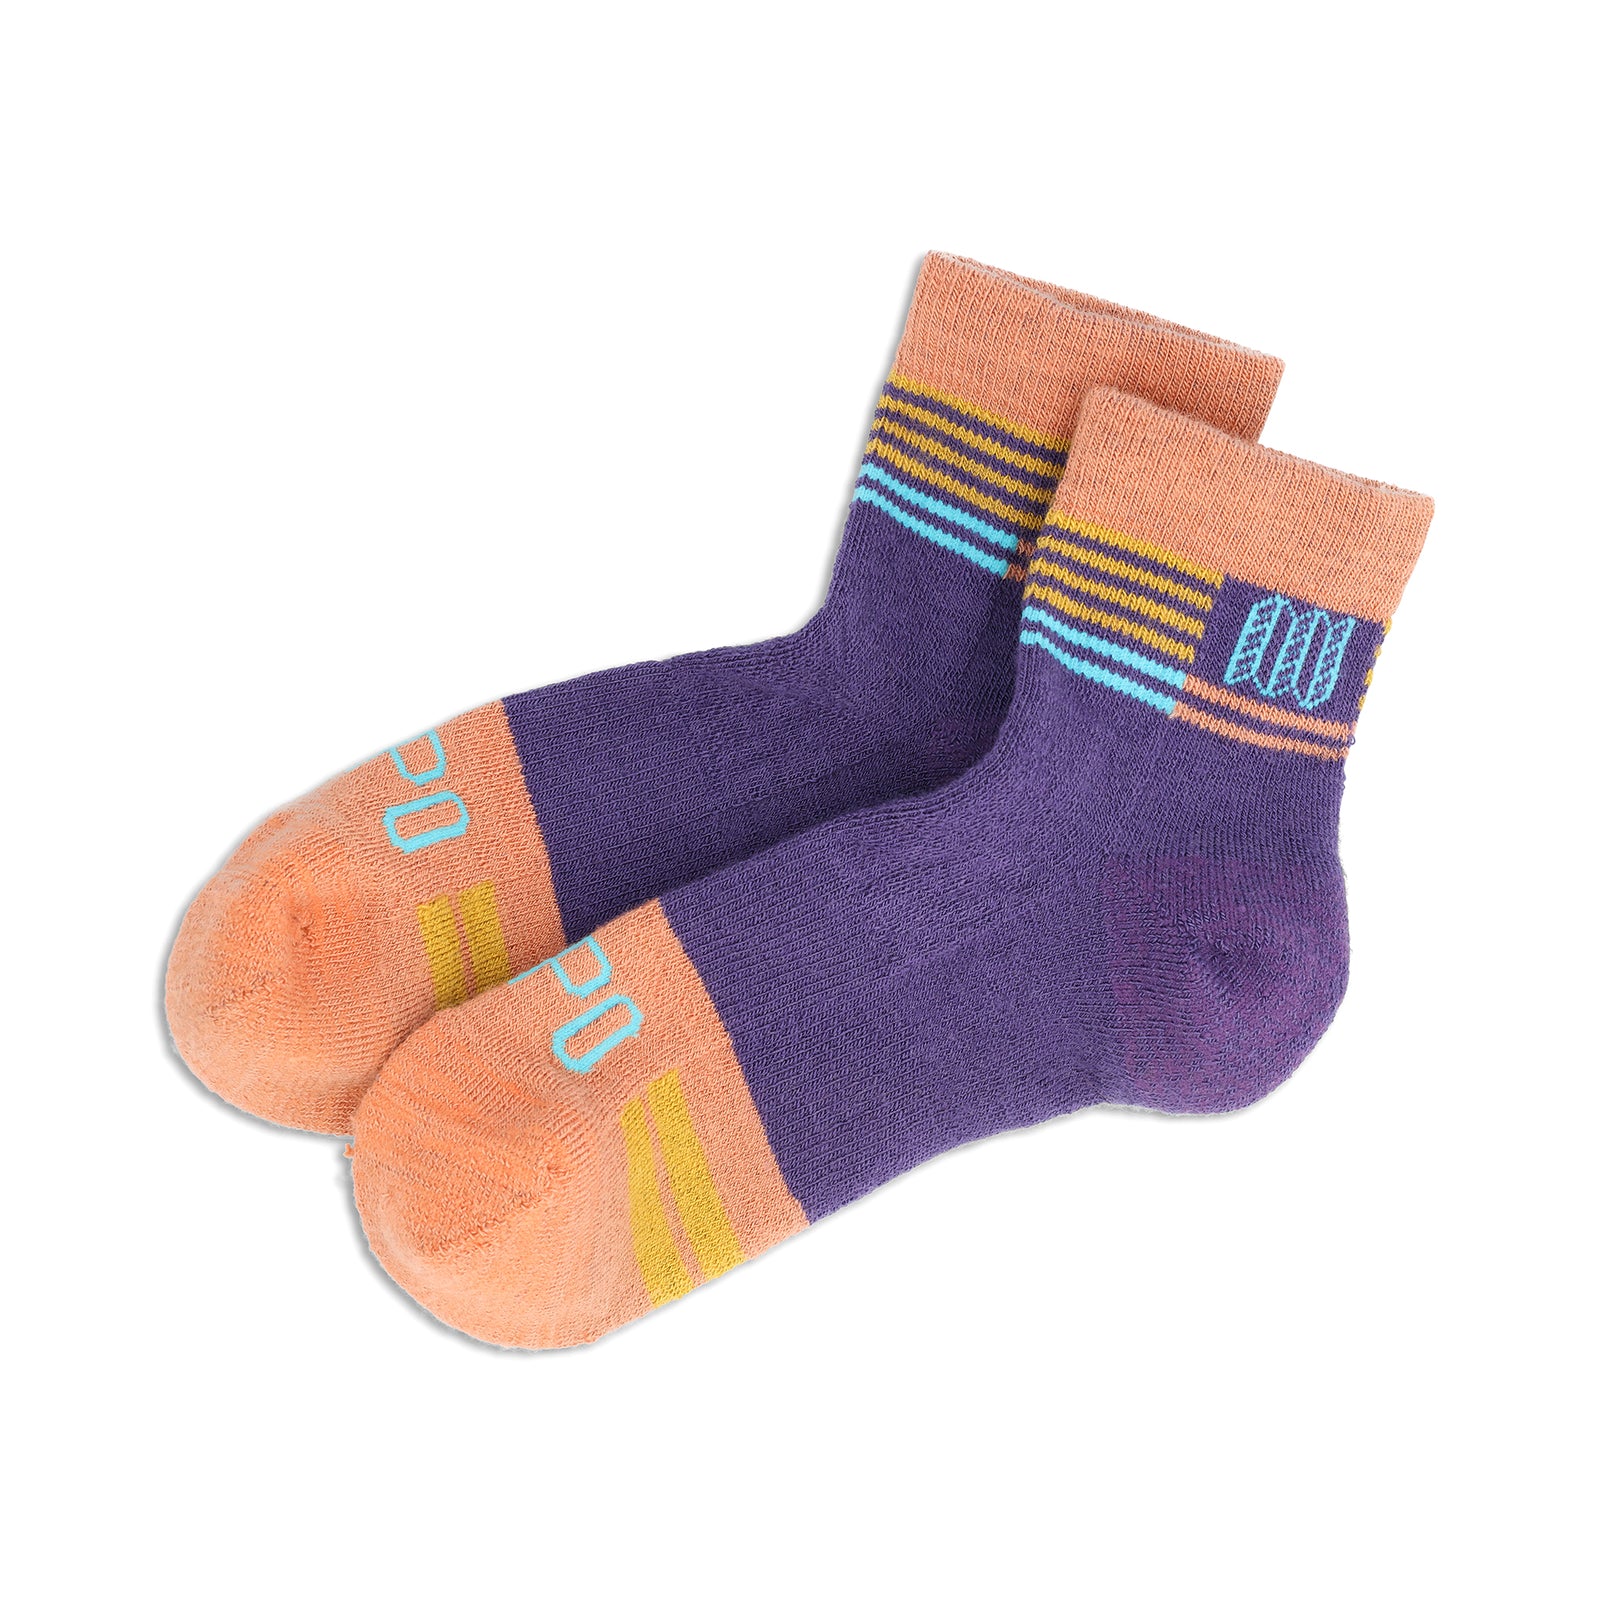 Front View of Topo Designs Mountain Trail Sock in "Loganberry / Coral"